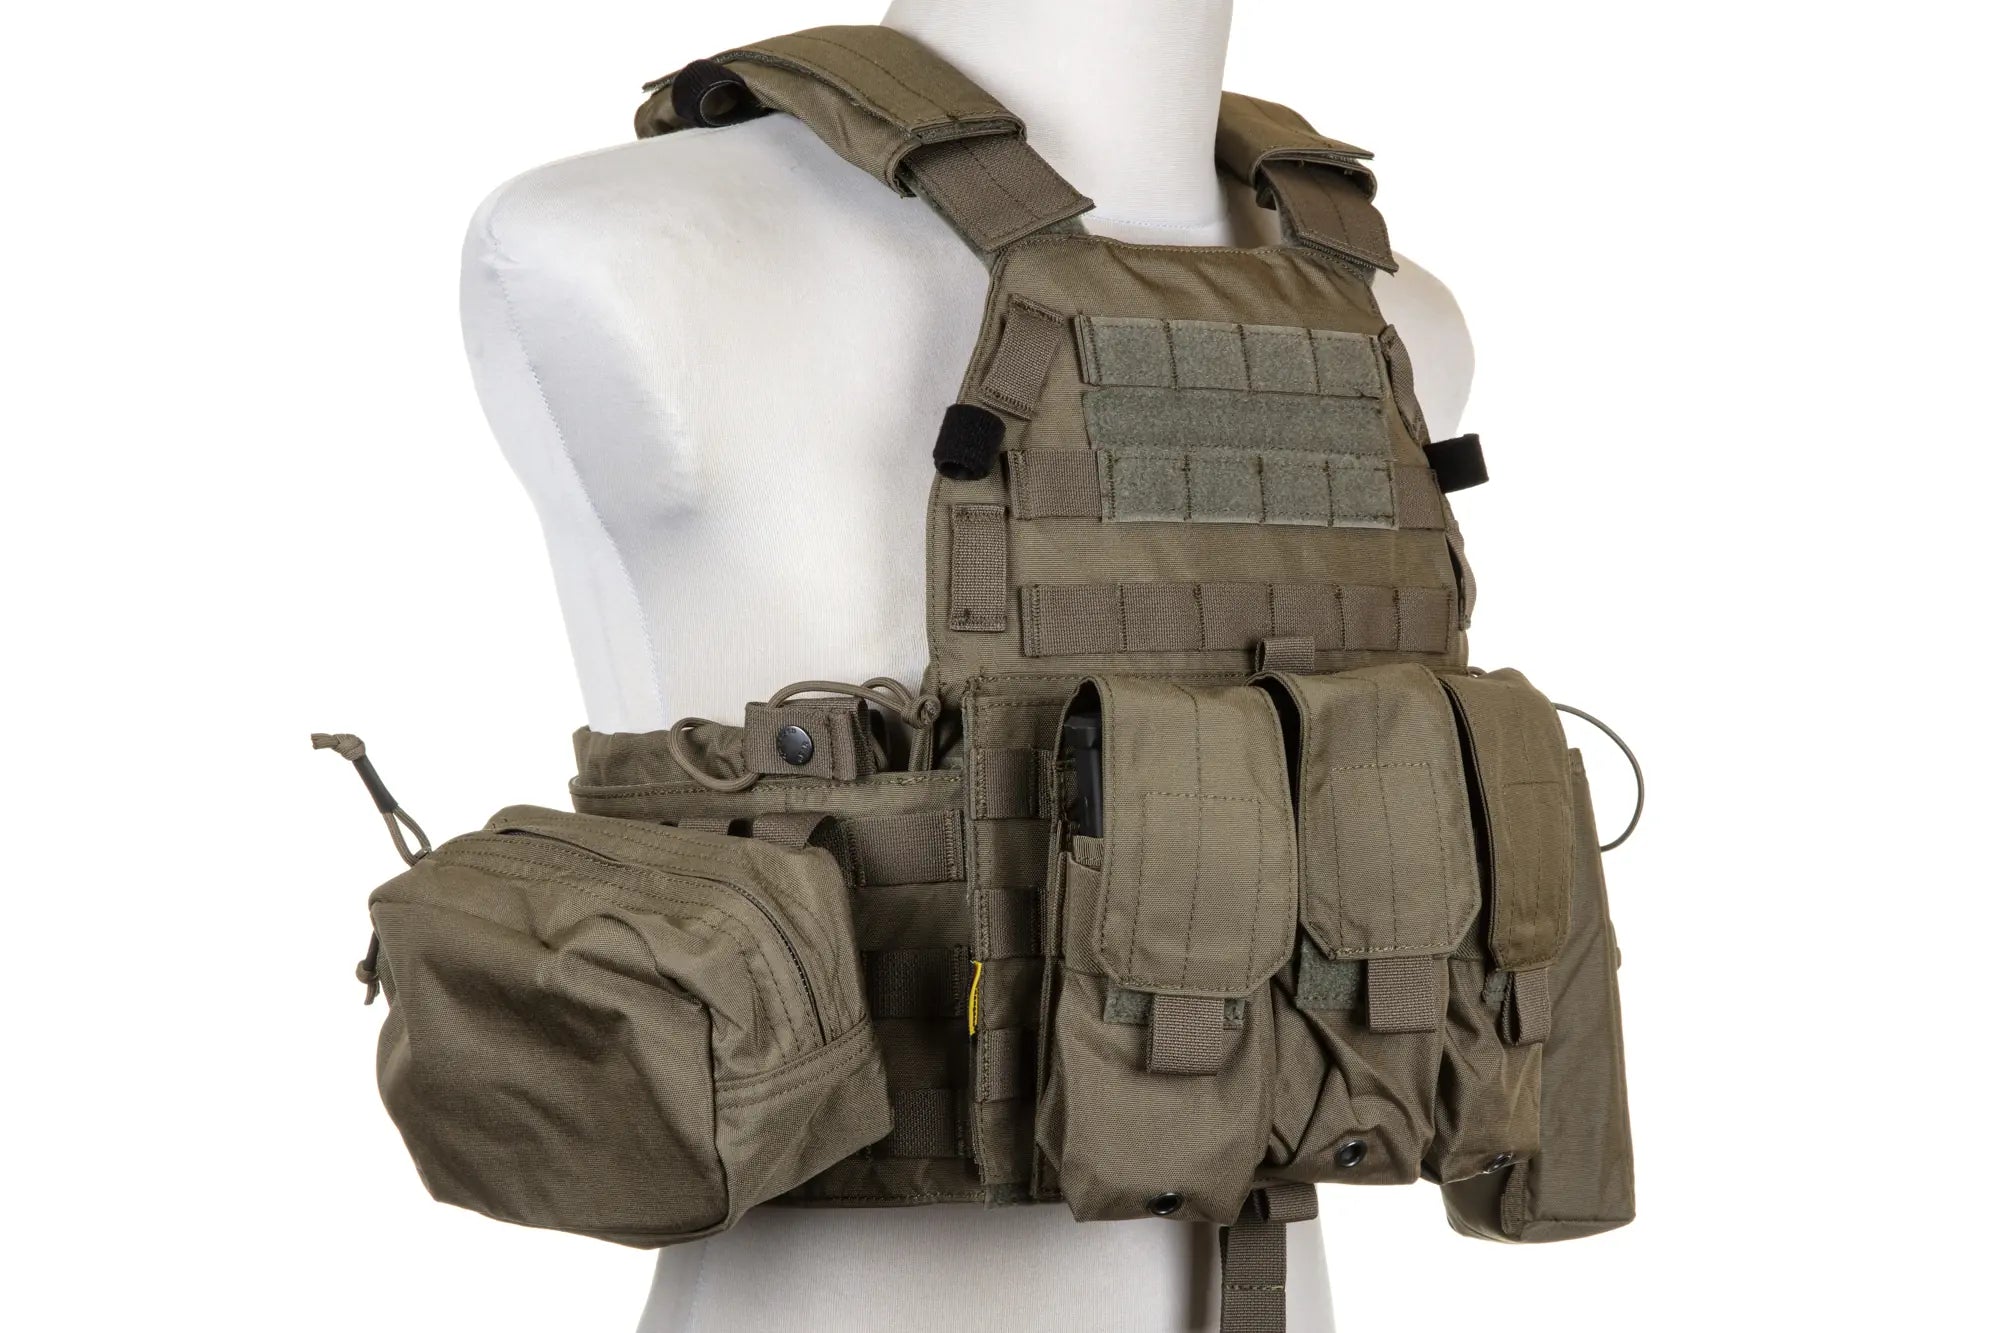 Emerson Gear 6094A Style Plate Carrier waistcoat with Ranger Green cargo kit-4